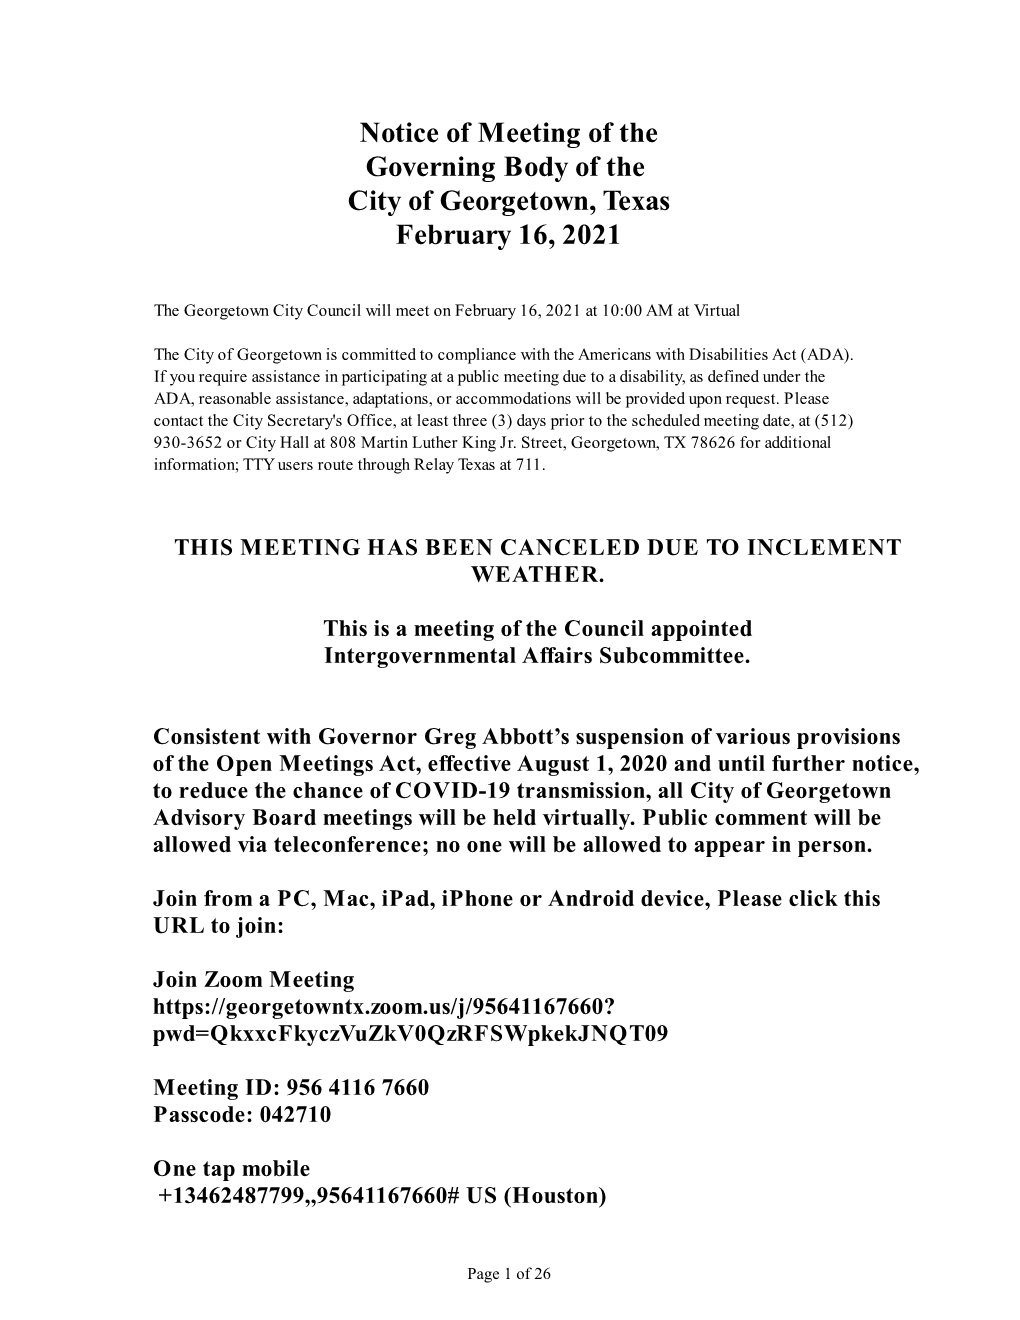 Notice of Meeting of the Governing Body of the City of Georgetown, Texas February 16, 2021